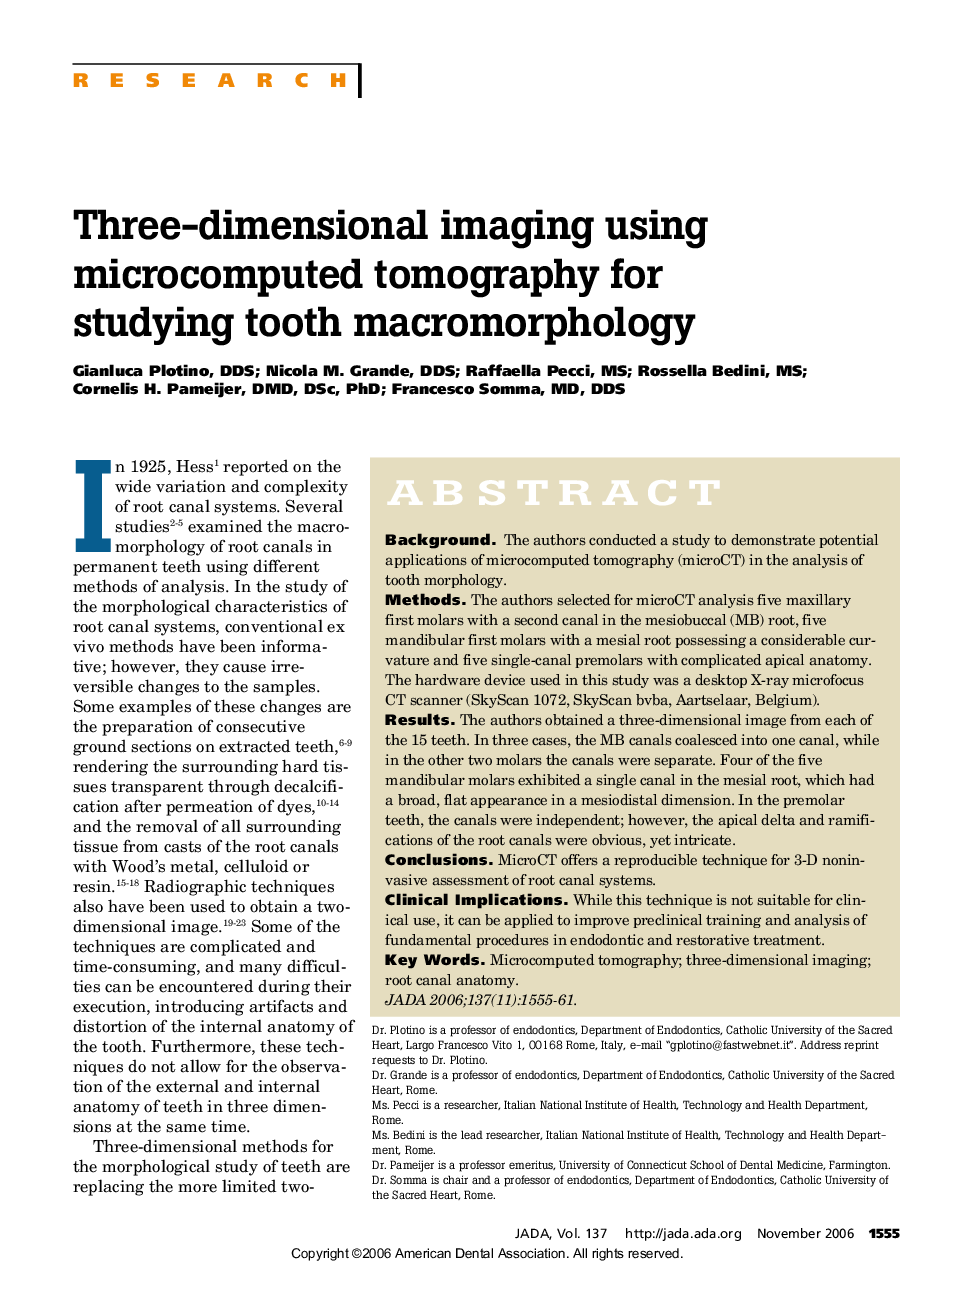 Three-dimensional imaging using microcomputed tomography for studying tooth macromorphology 